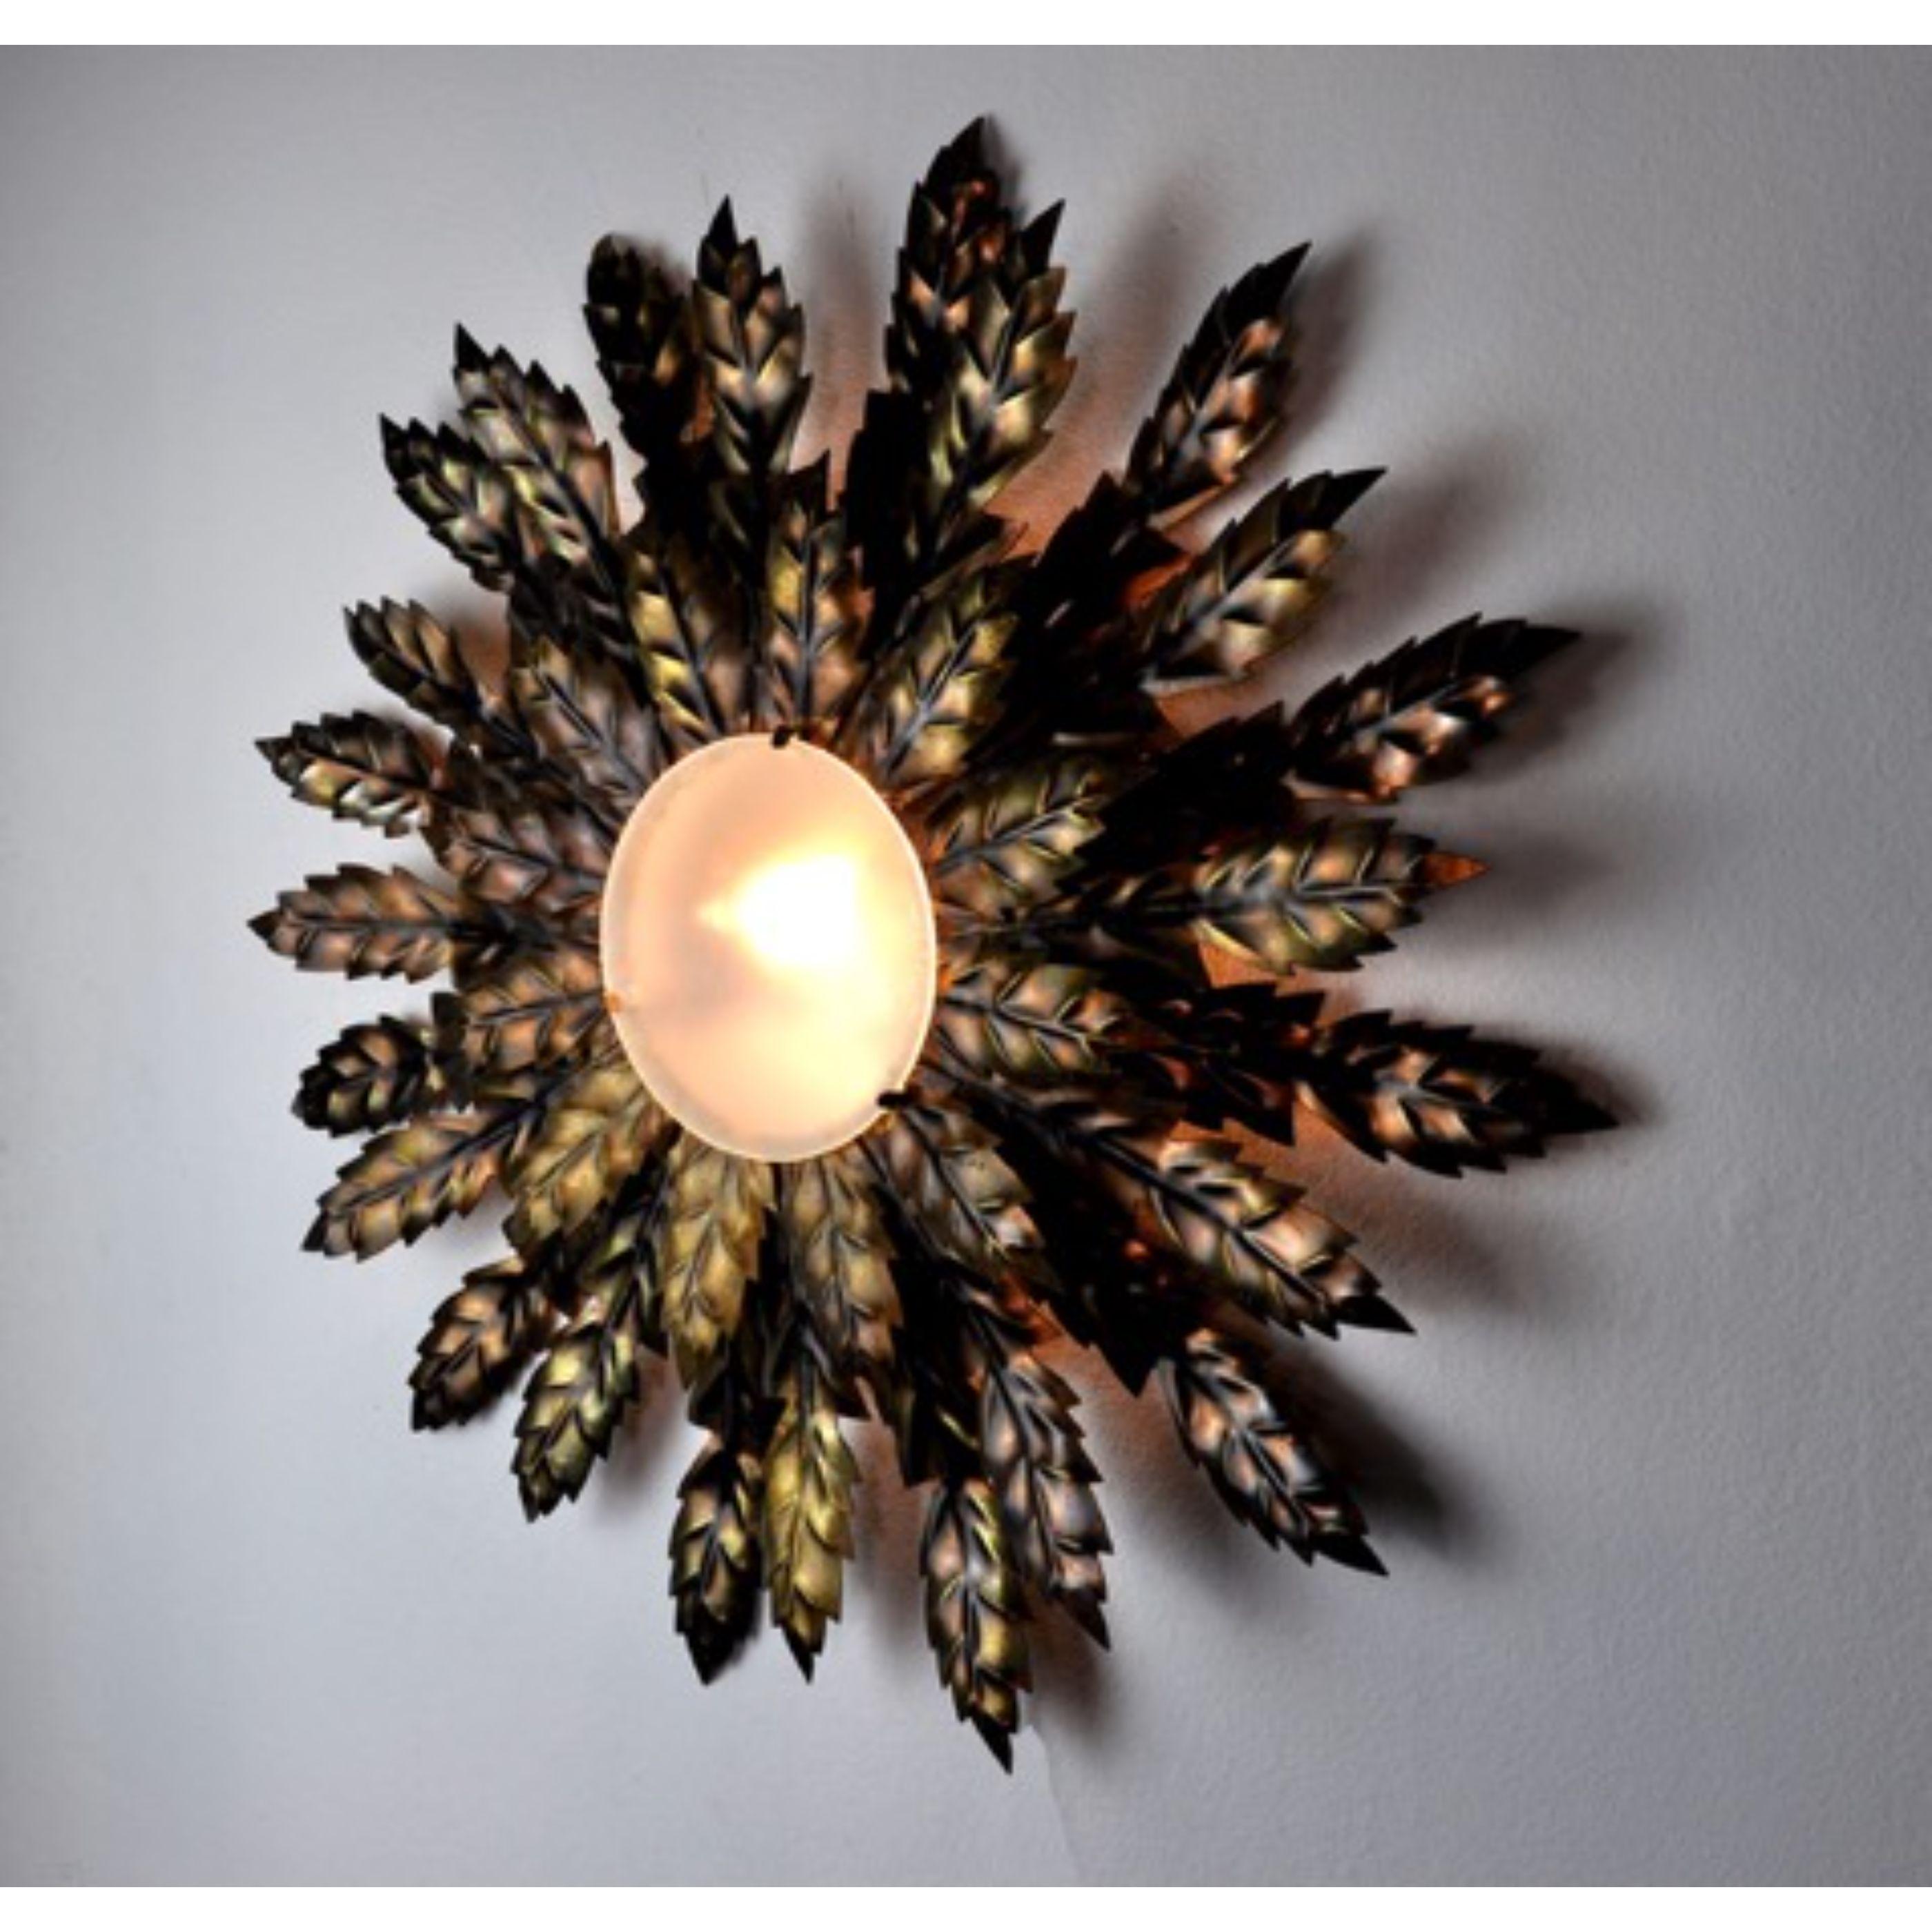 Superb and rare sun wall lamp or ceiling lamp, designed and produced in italy in the 1970s.

This unique object is composed of golden metal sheets in a floral theme.

Object that will illuminate wonderfully and bring a real design touch to your